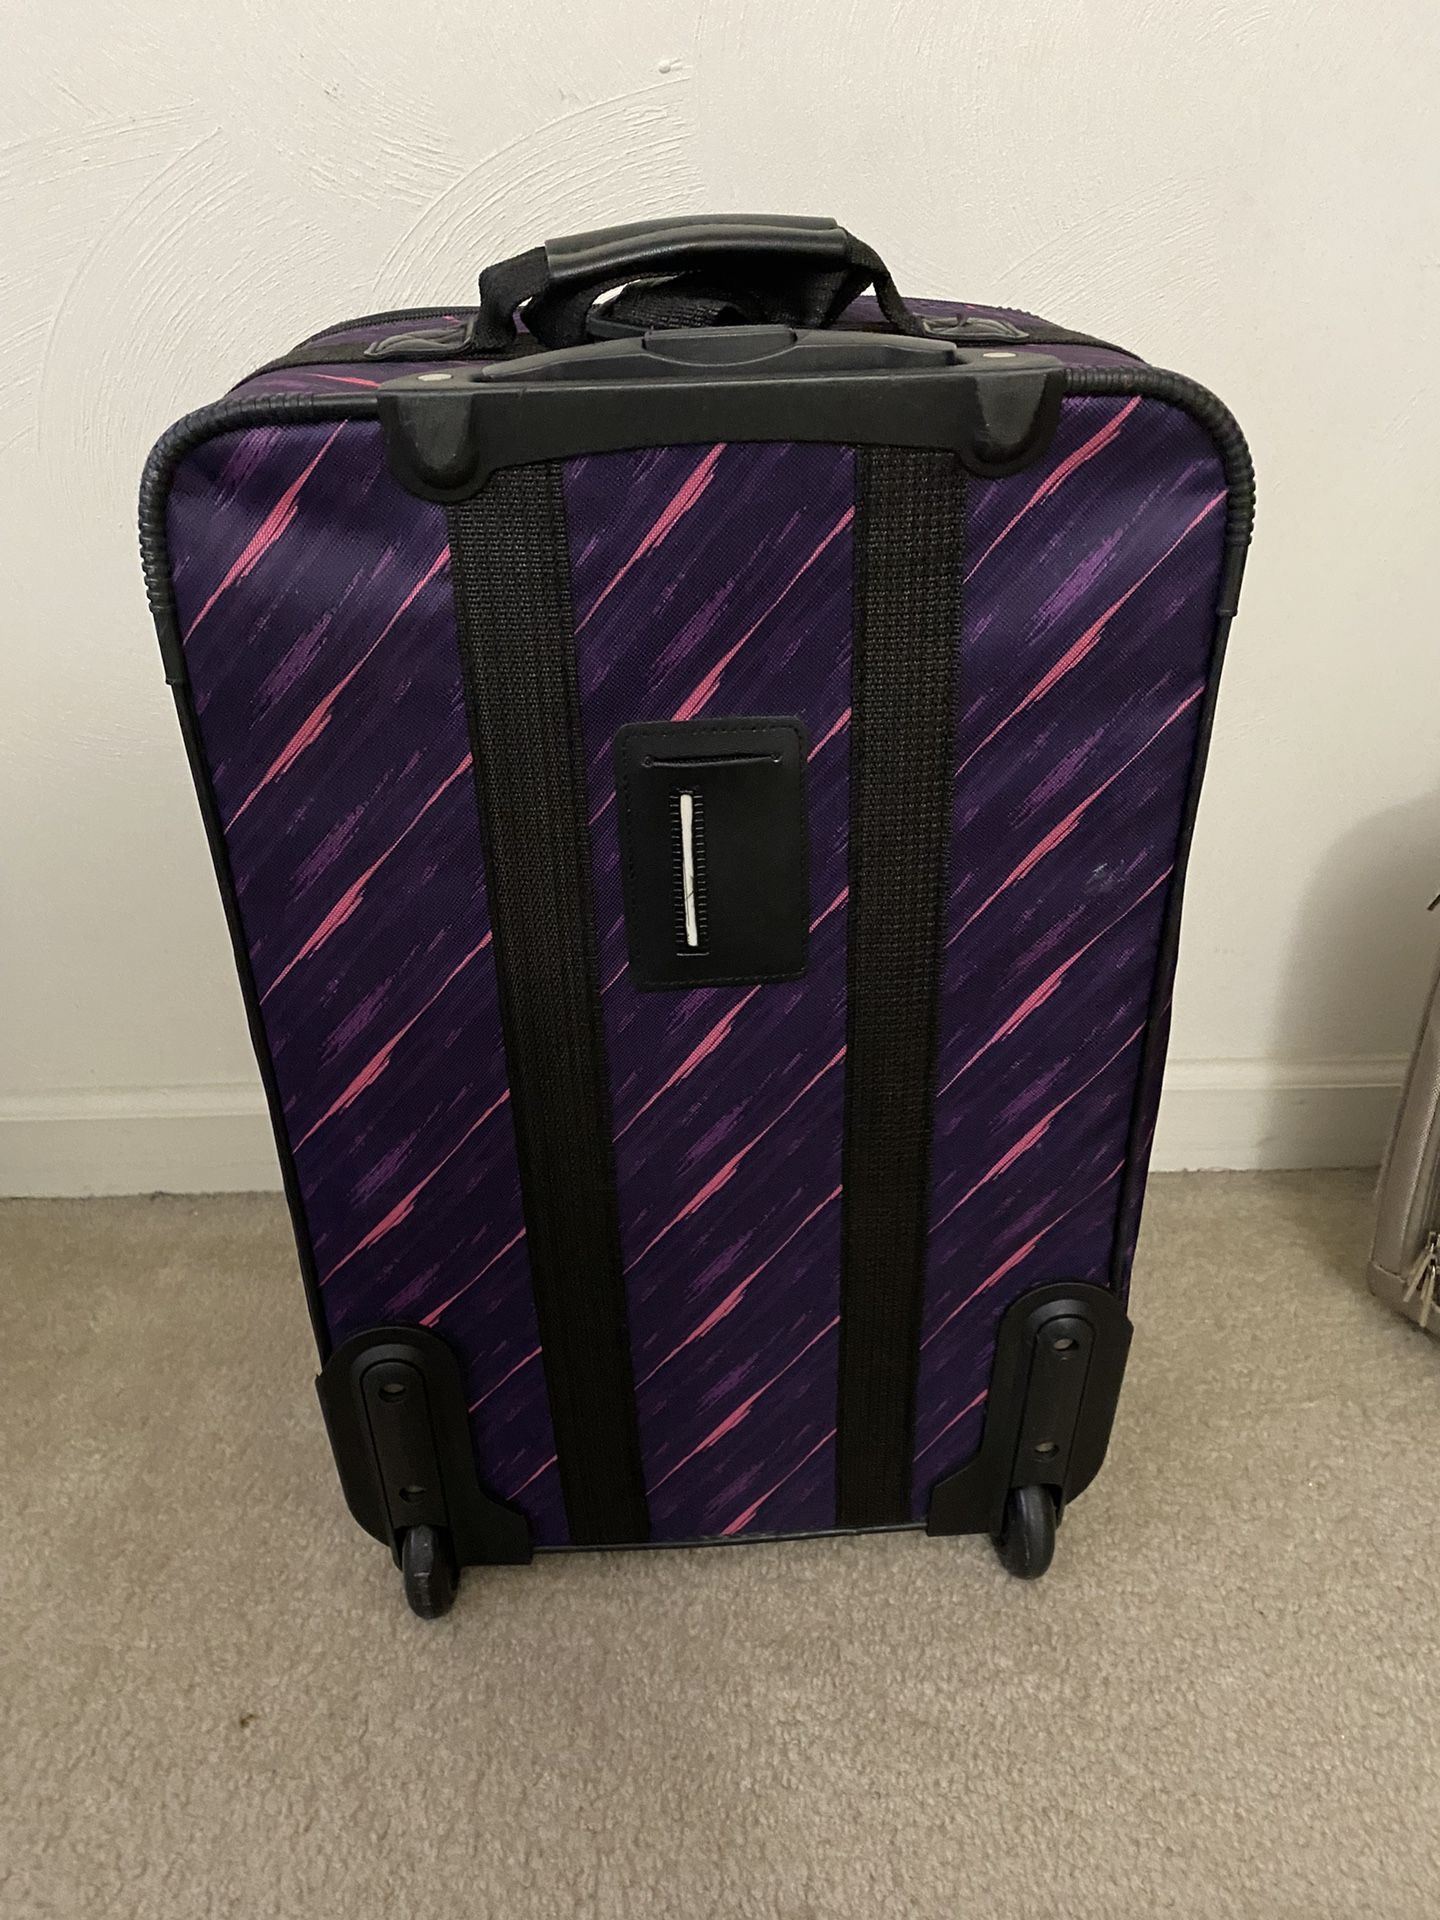 Cabin Luggage For Sale